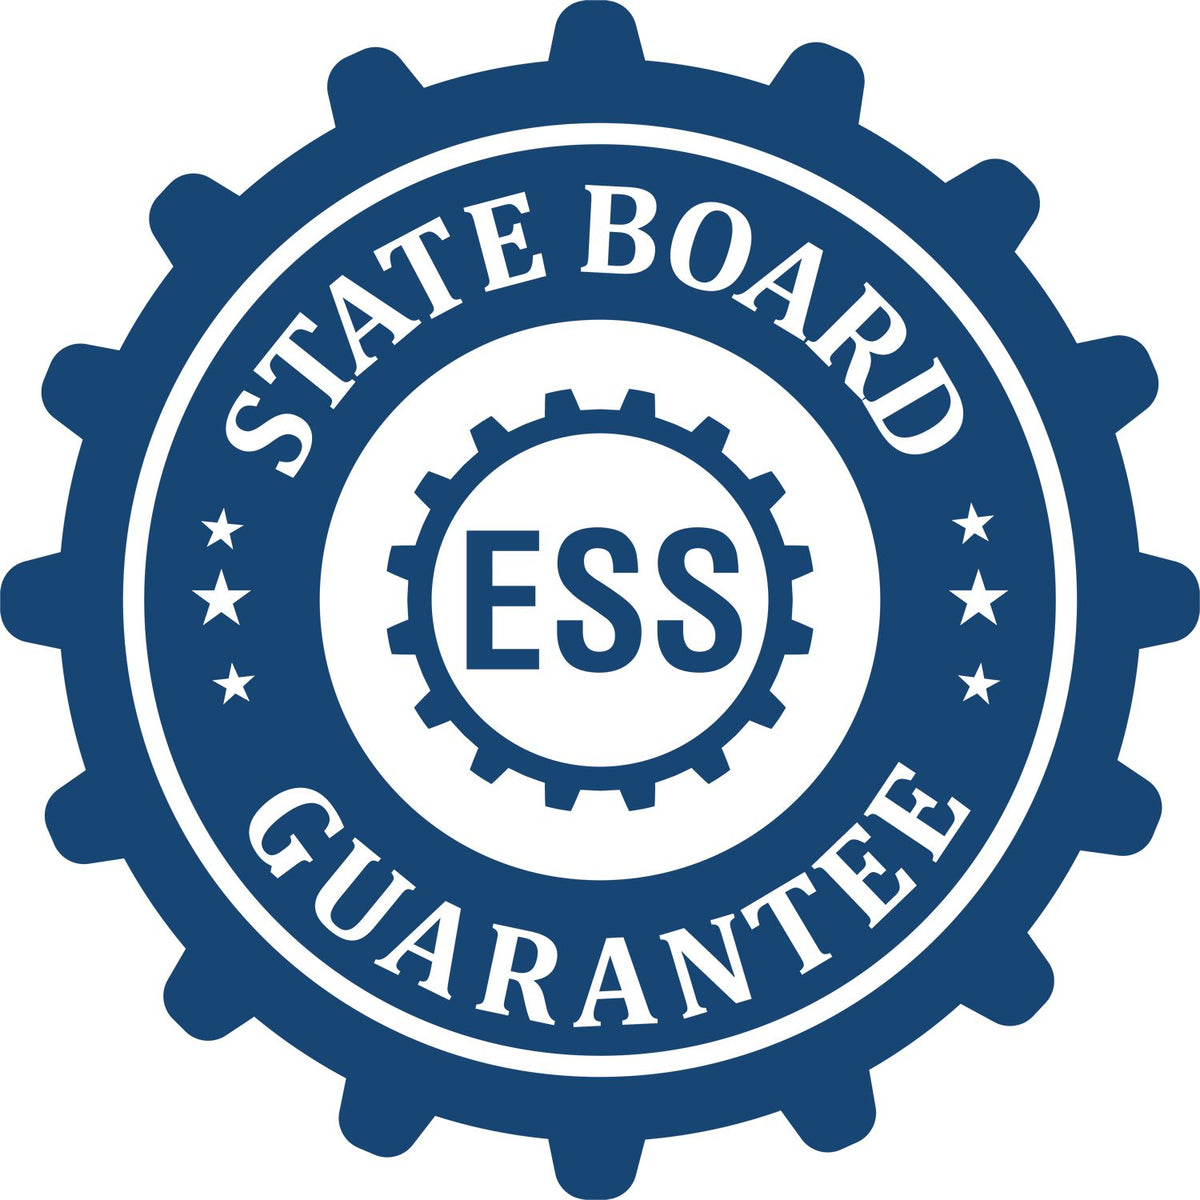 An emblem in a gear shape illustrating a state board guarantee for the Kentucky Engineer Desk Seal product.